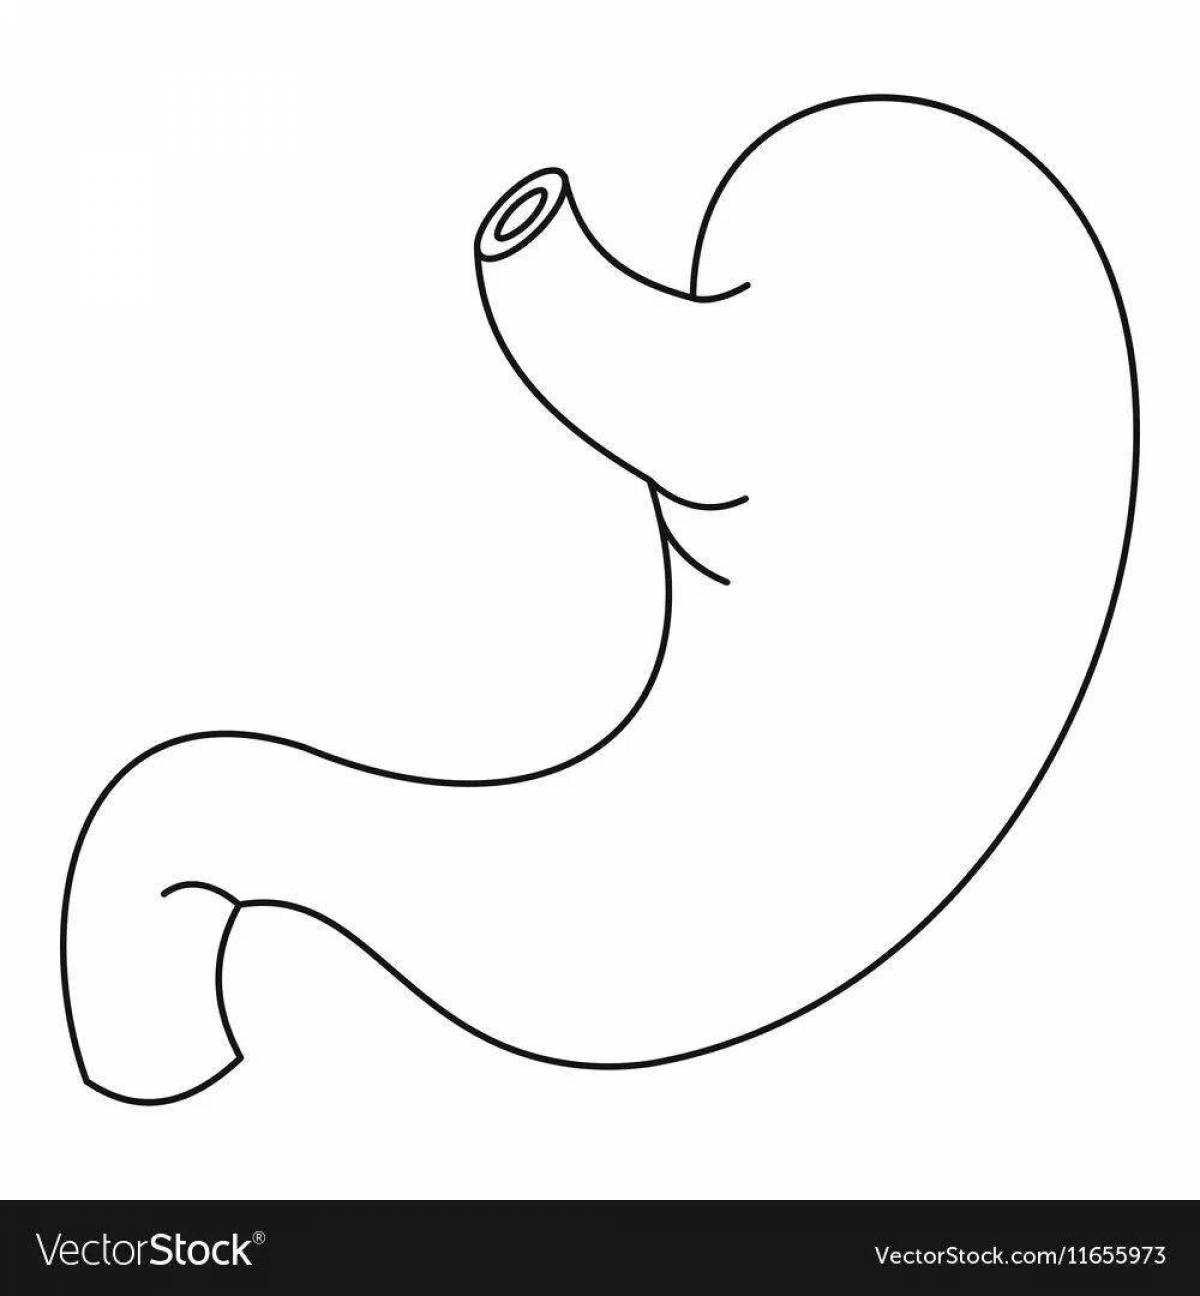 Glowing stomach coloring page